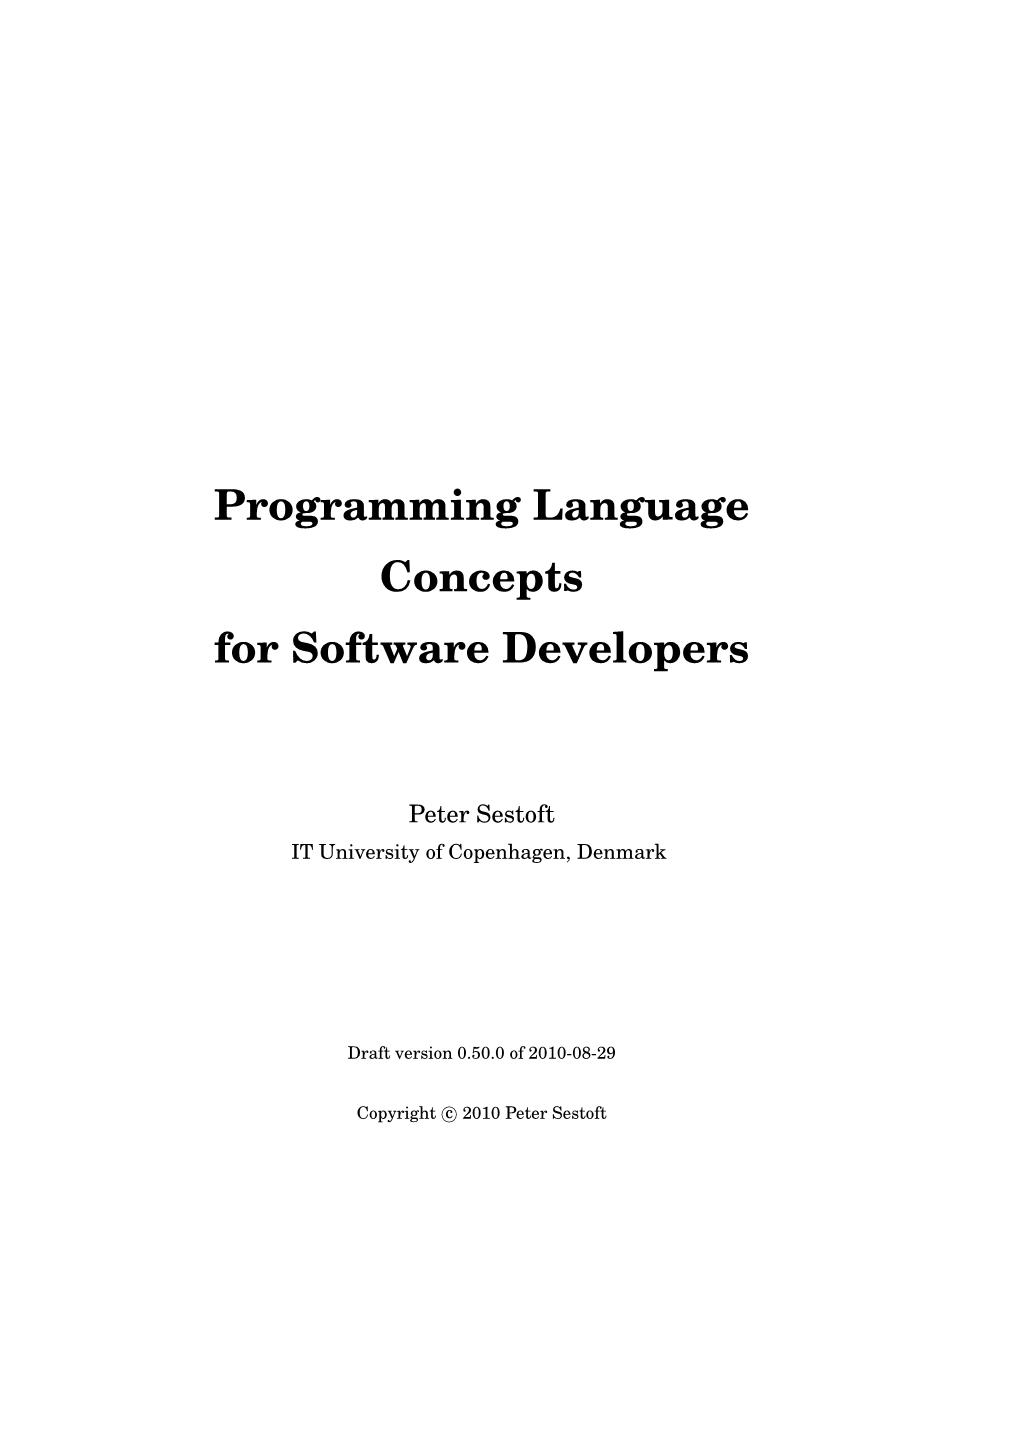 Programming Language Concepts for Software Developers